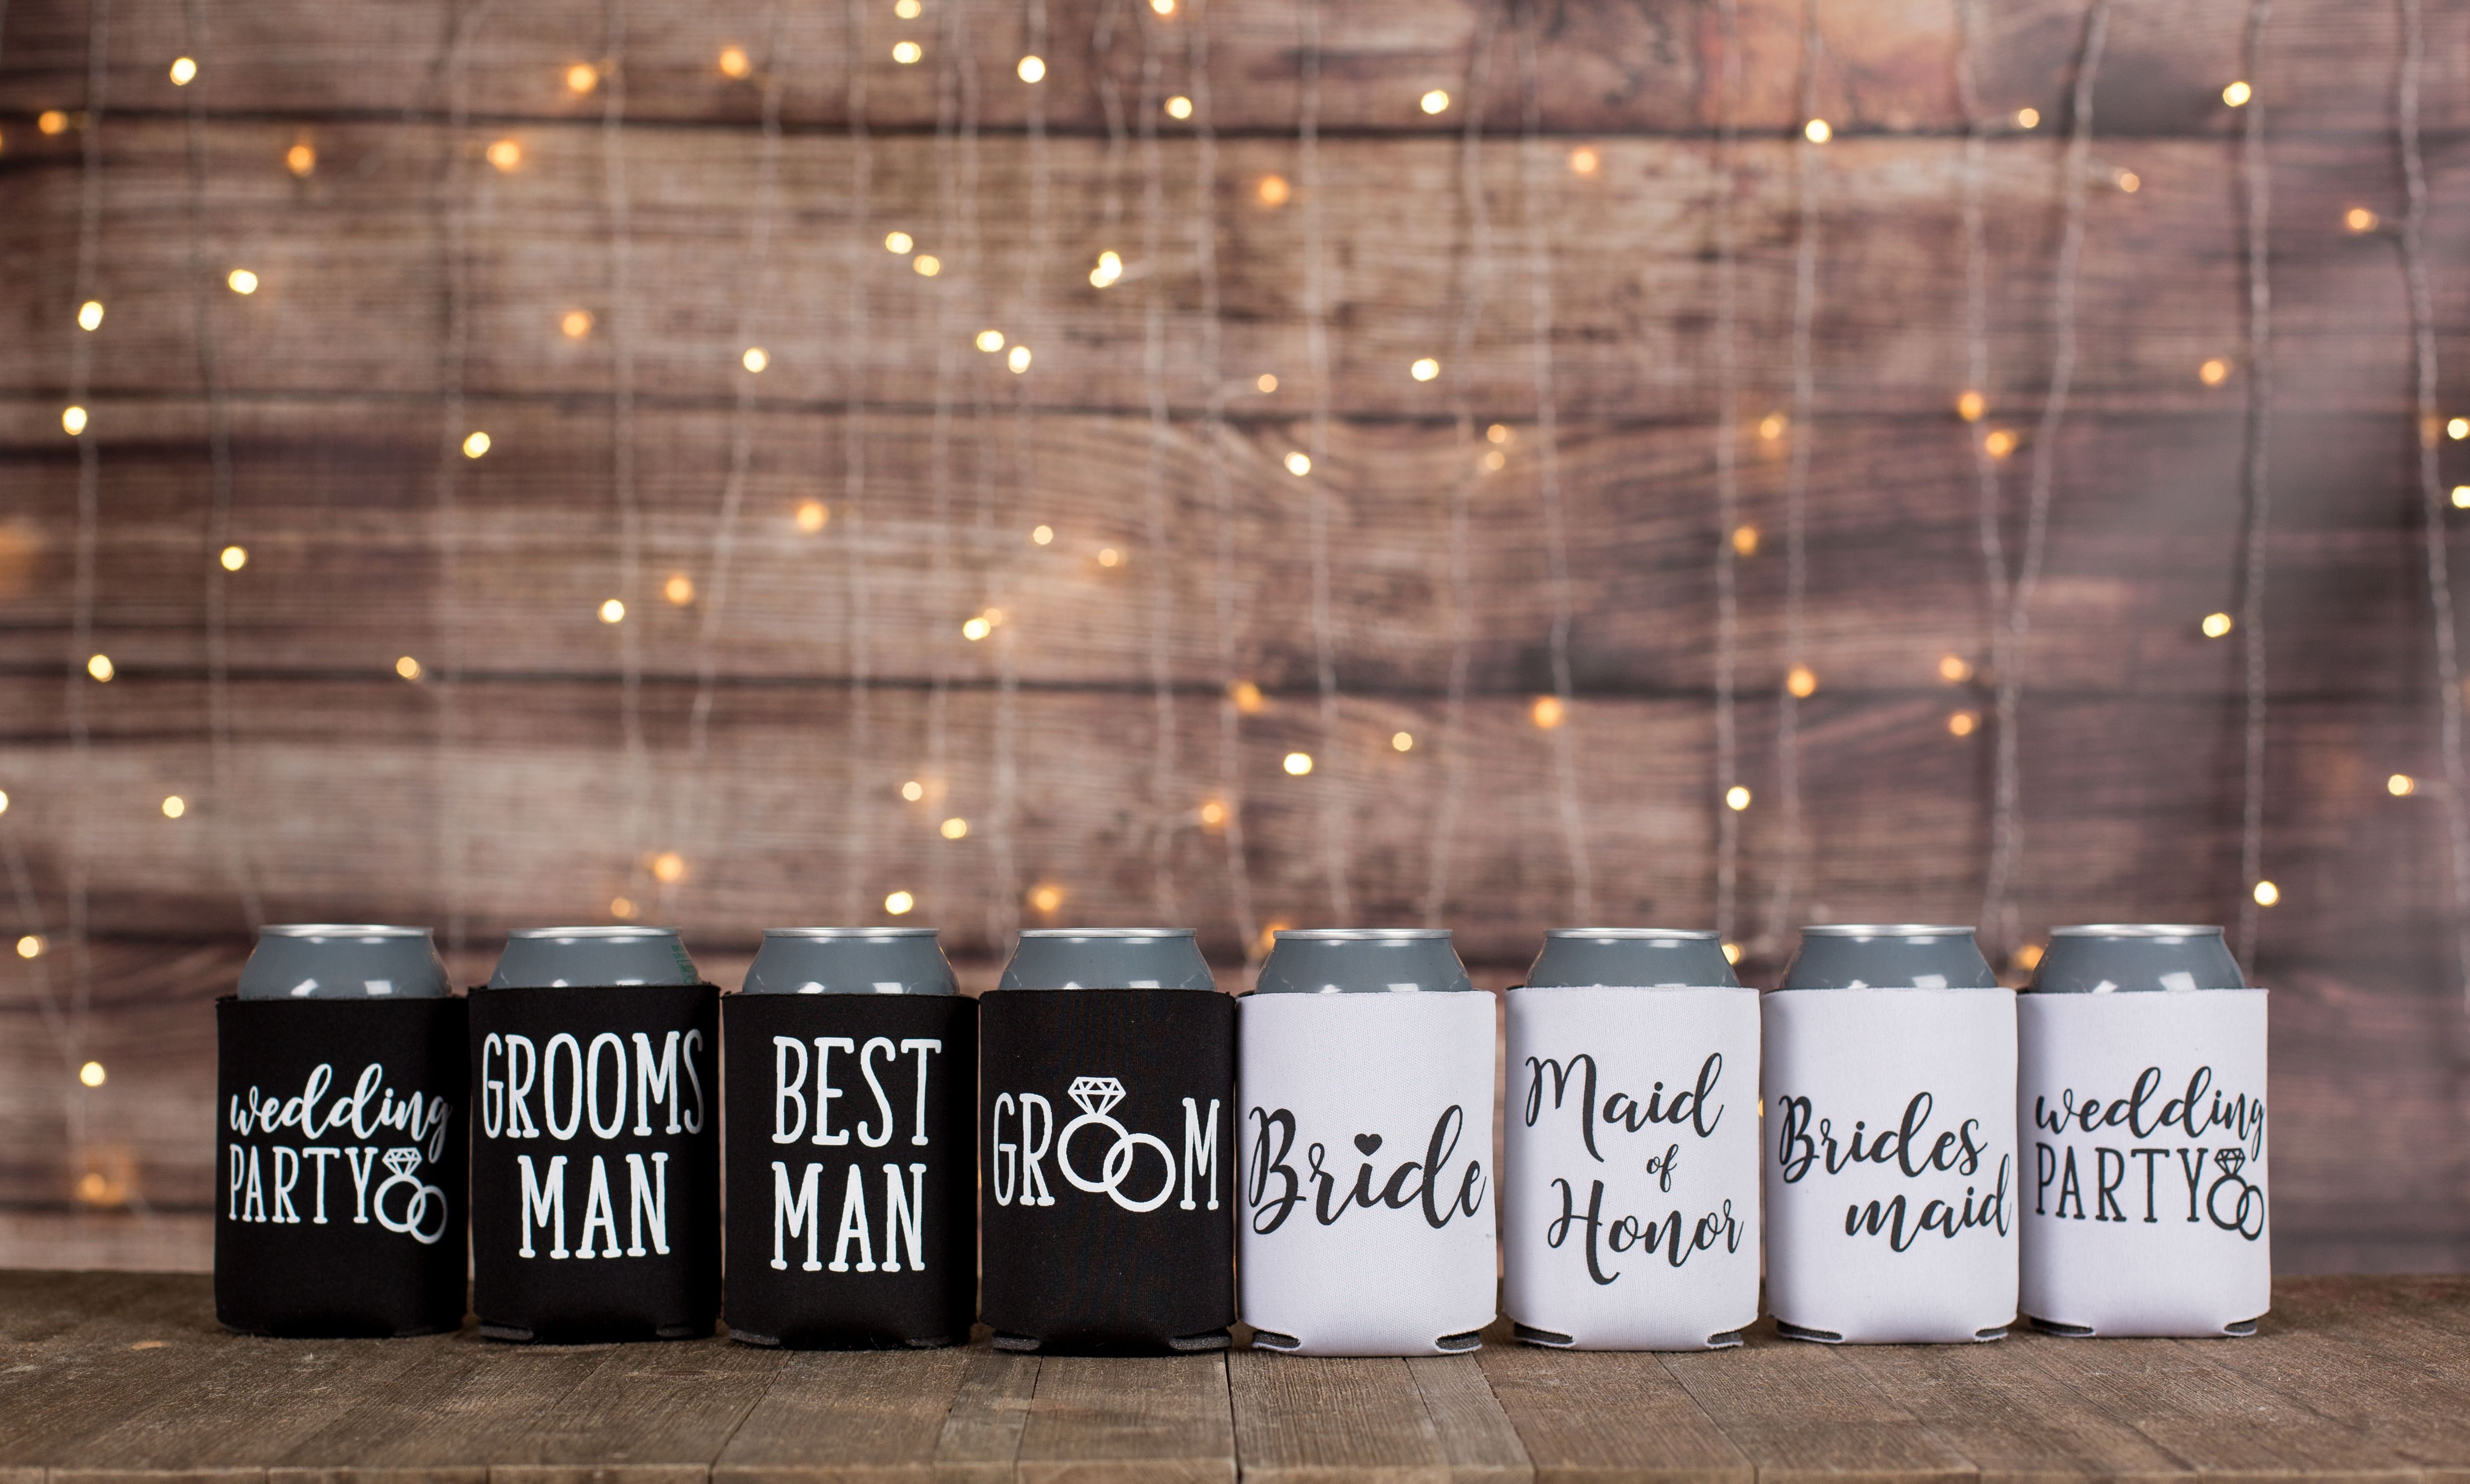 Check Out Our Wedding Party Koozies We Offer Many More To Fit